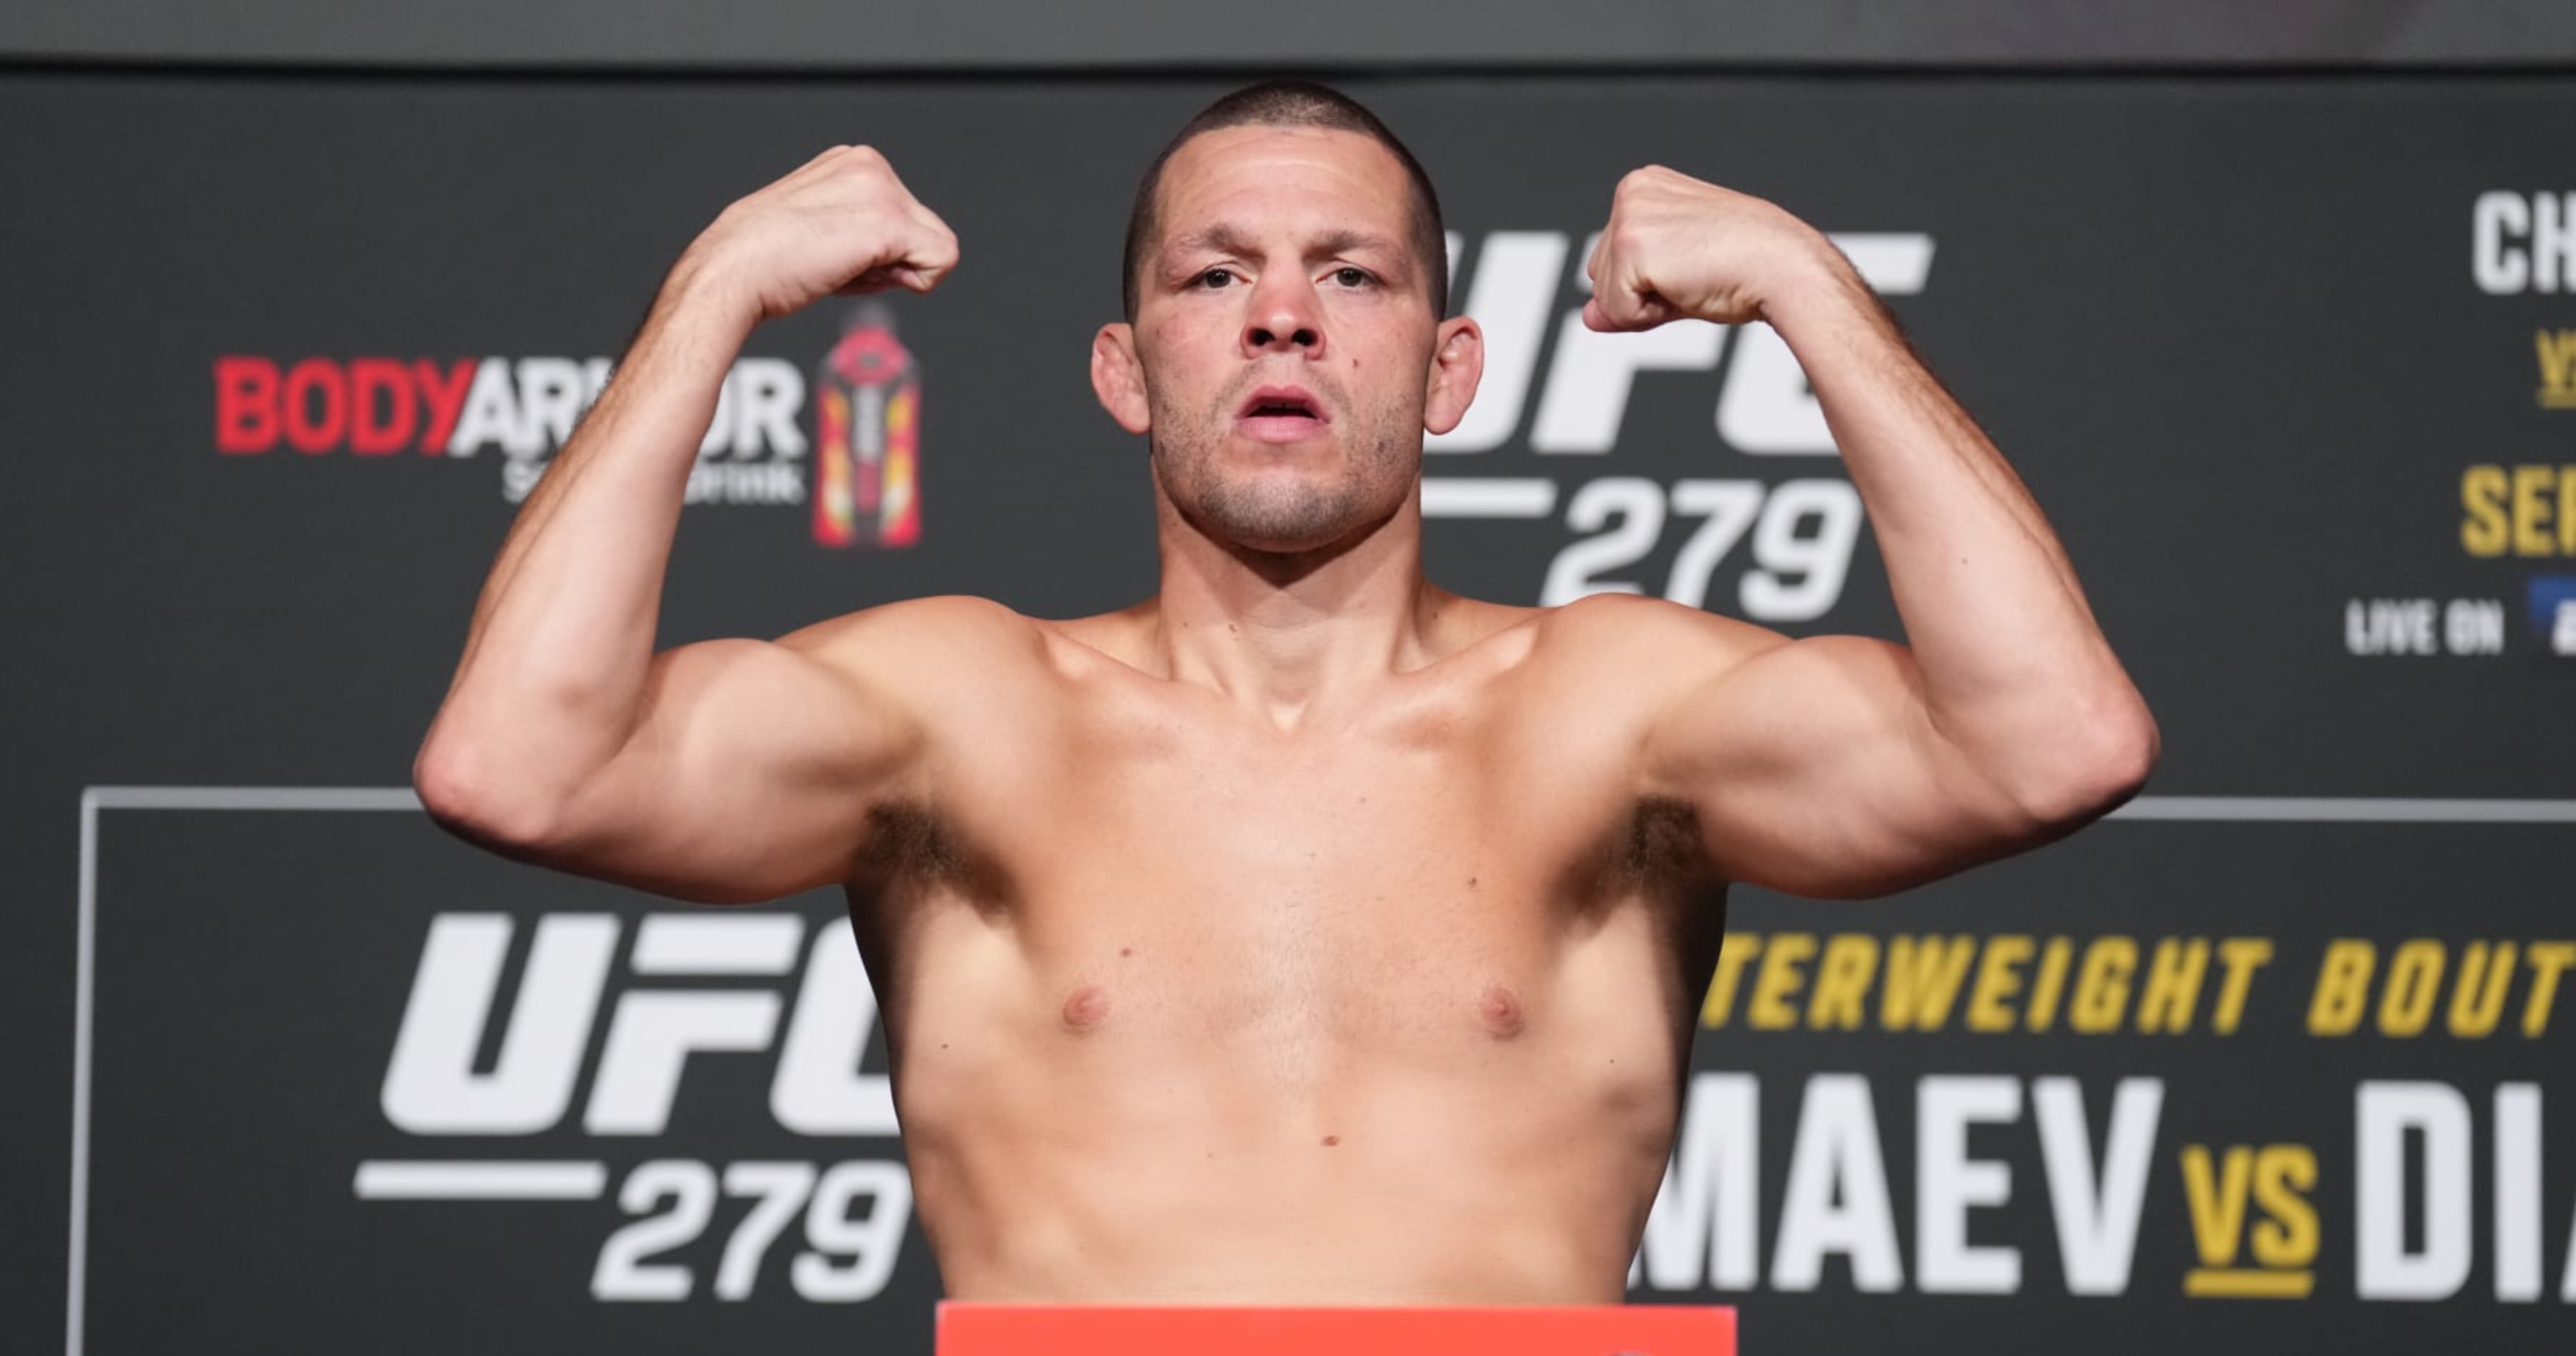 Nate Diaz vs. Tony Ferguson Headlines Revised UFC 279 Card After Weigh-In Drama